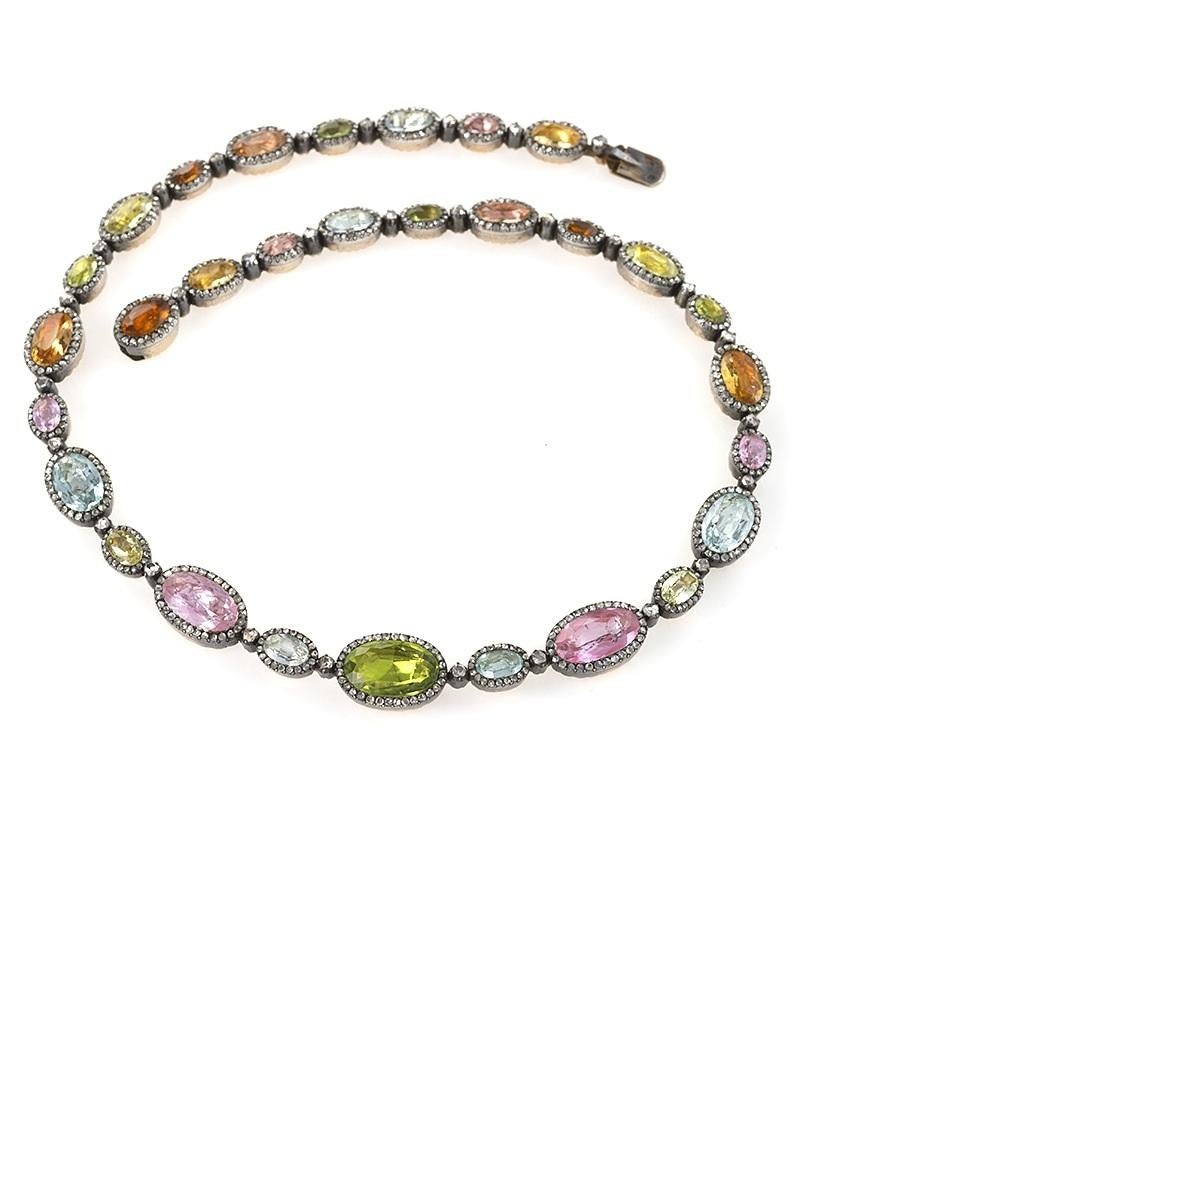 A French Antique 18 karat gold and silver top necklace with diamonds, peridots, grossularite garnets, pink topaz, aquamarines and chrysoberyls. The graduated, foiled colored stones are framed and spaced with rose-cut diamonds weighing approximately